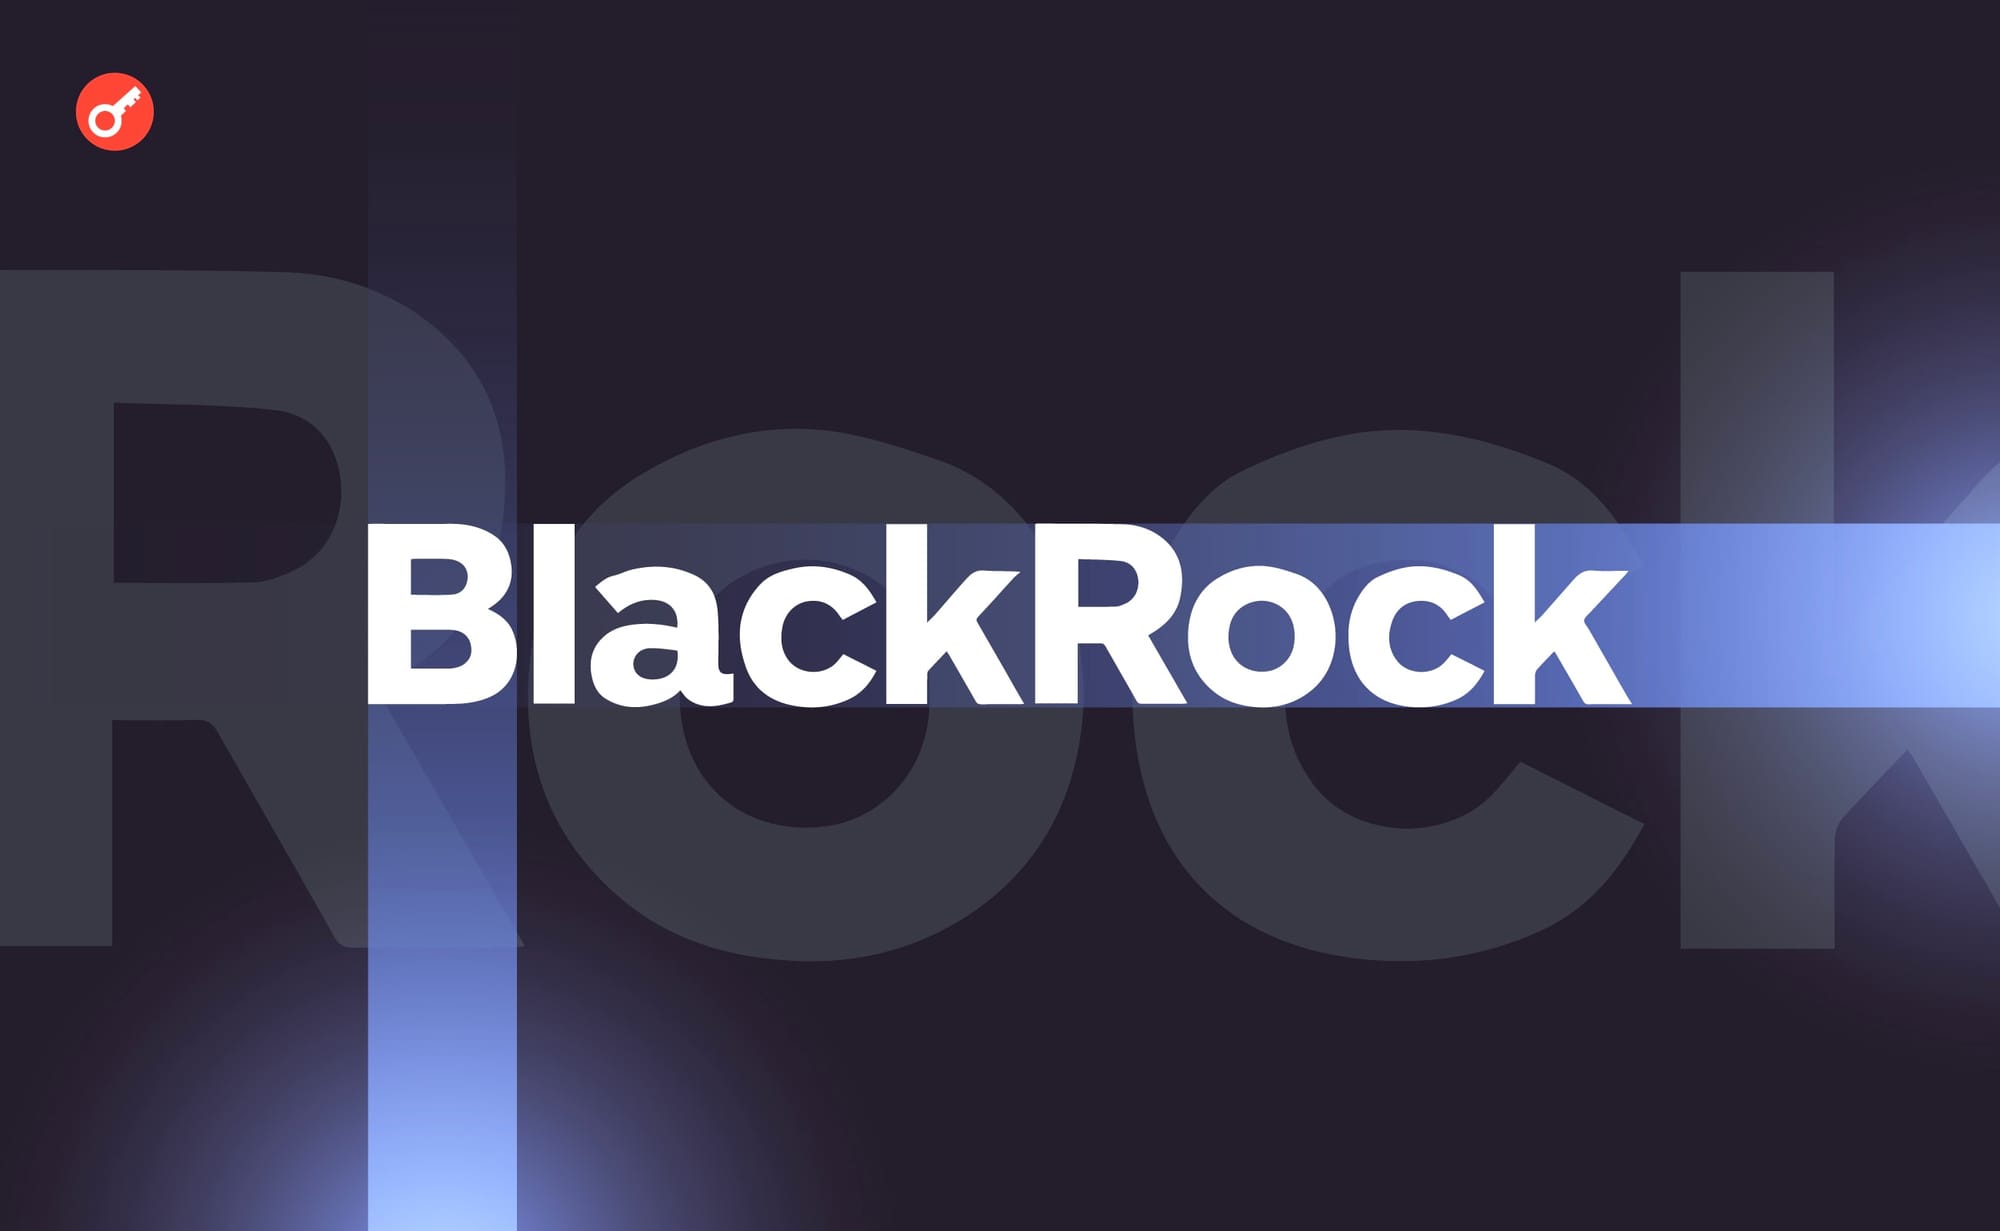 BlackRock has applied to buy shares of spot Bitcoin ETFs for the Global Allocation Fund